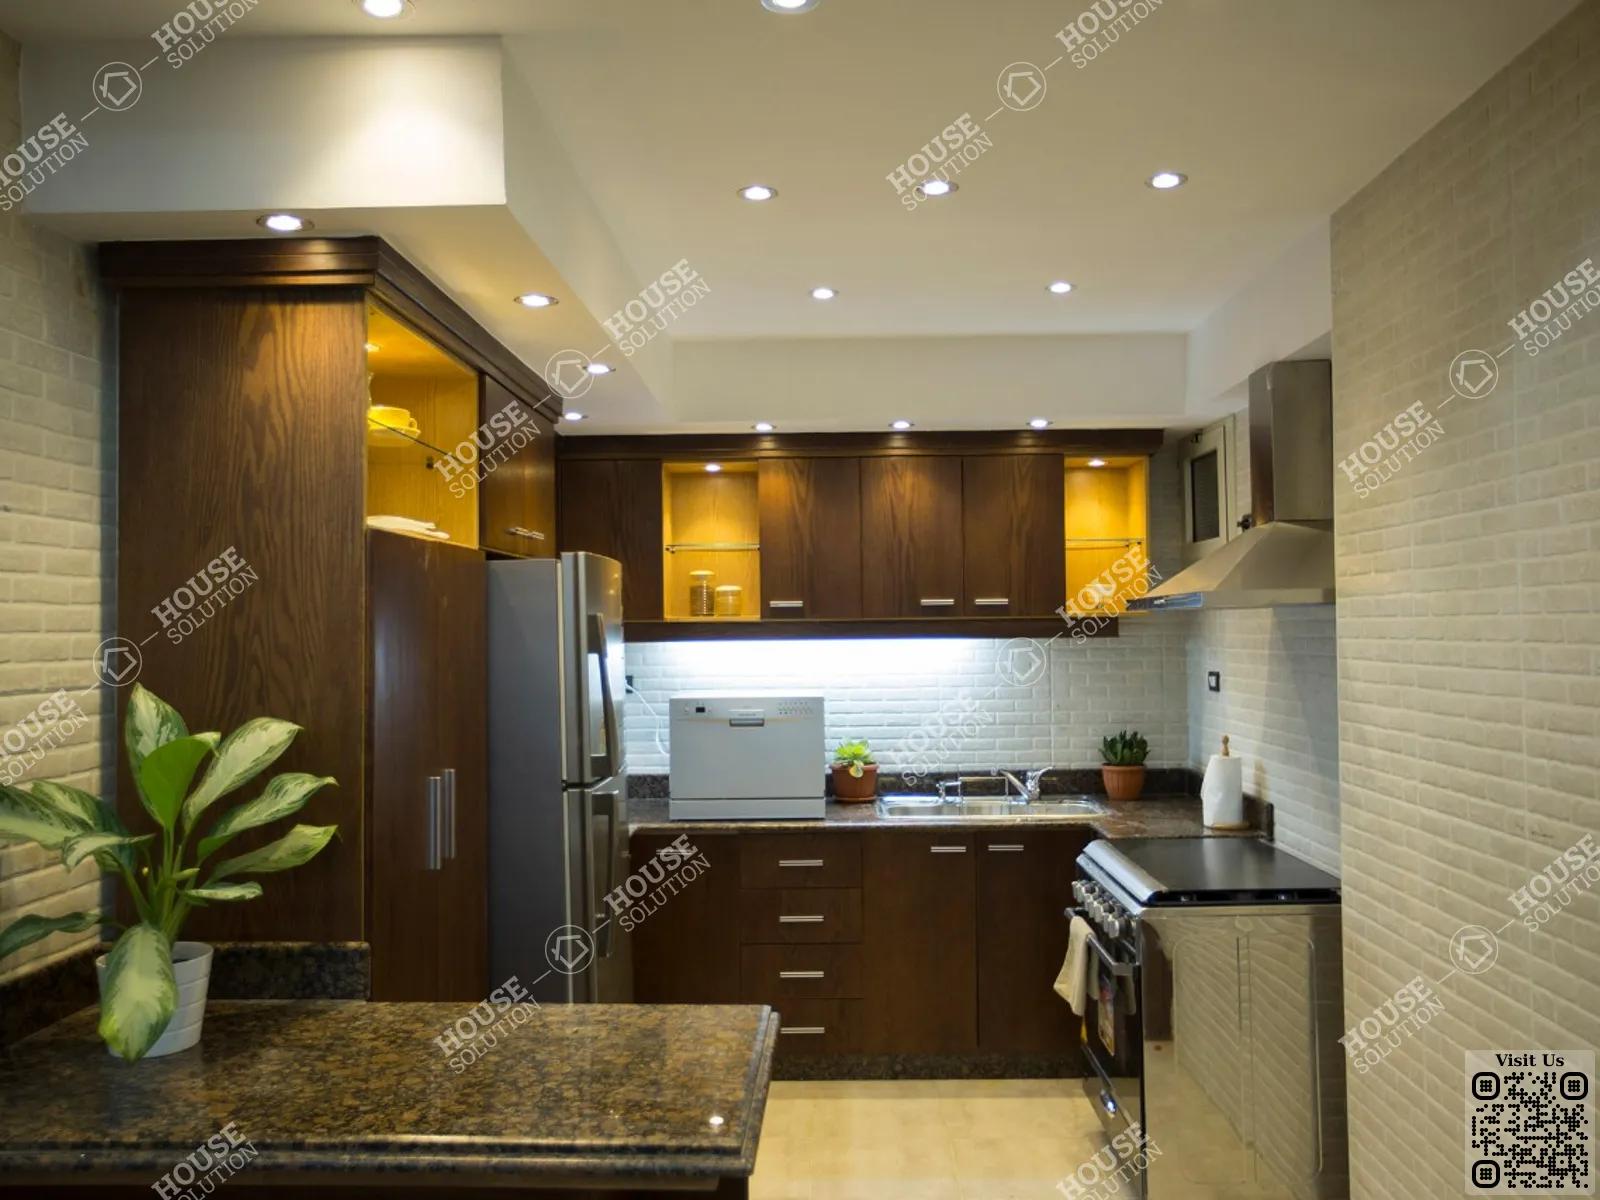 KITCHEN  @ Apartments For Rent In Maadi Maadi Sarayat Area: 200 m² consists of 3 Bedrooms 2 Bathrooms Modern furnished 5 stars #3996-1